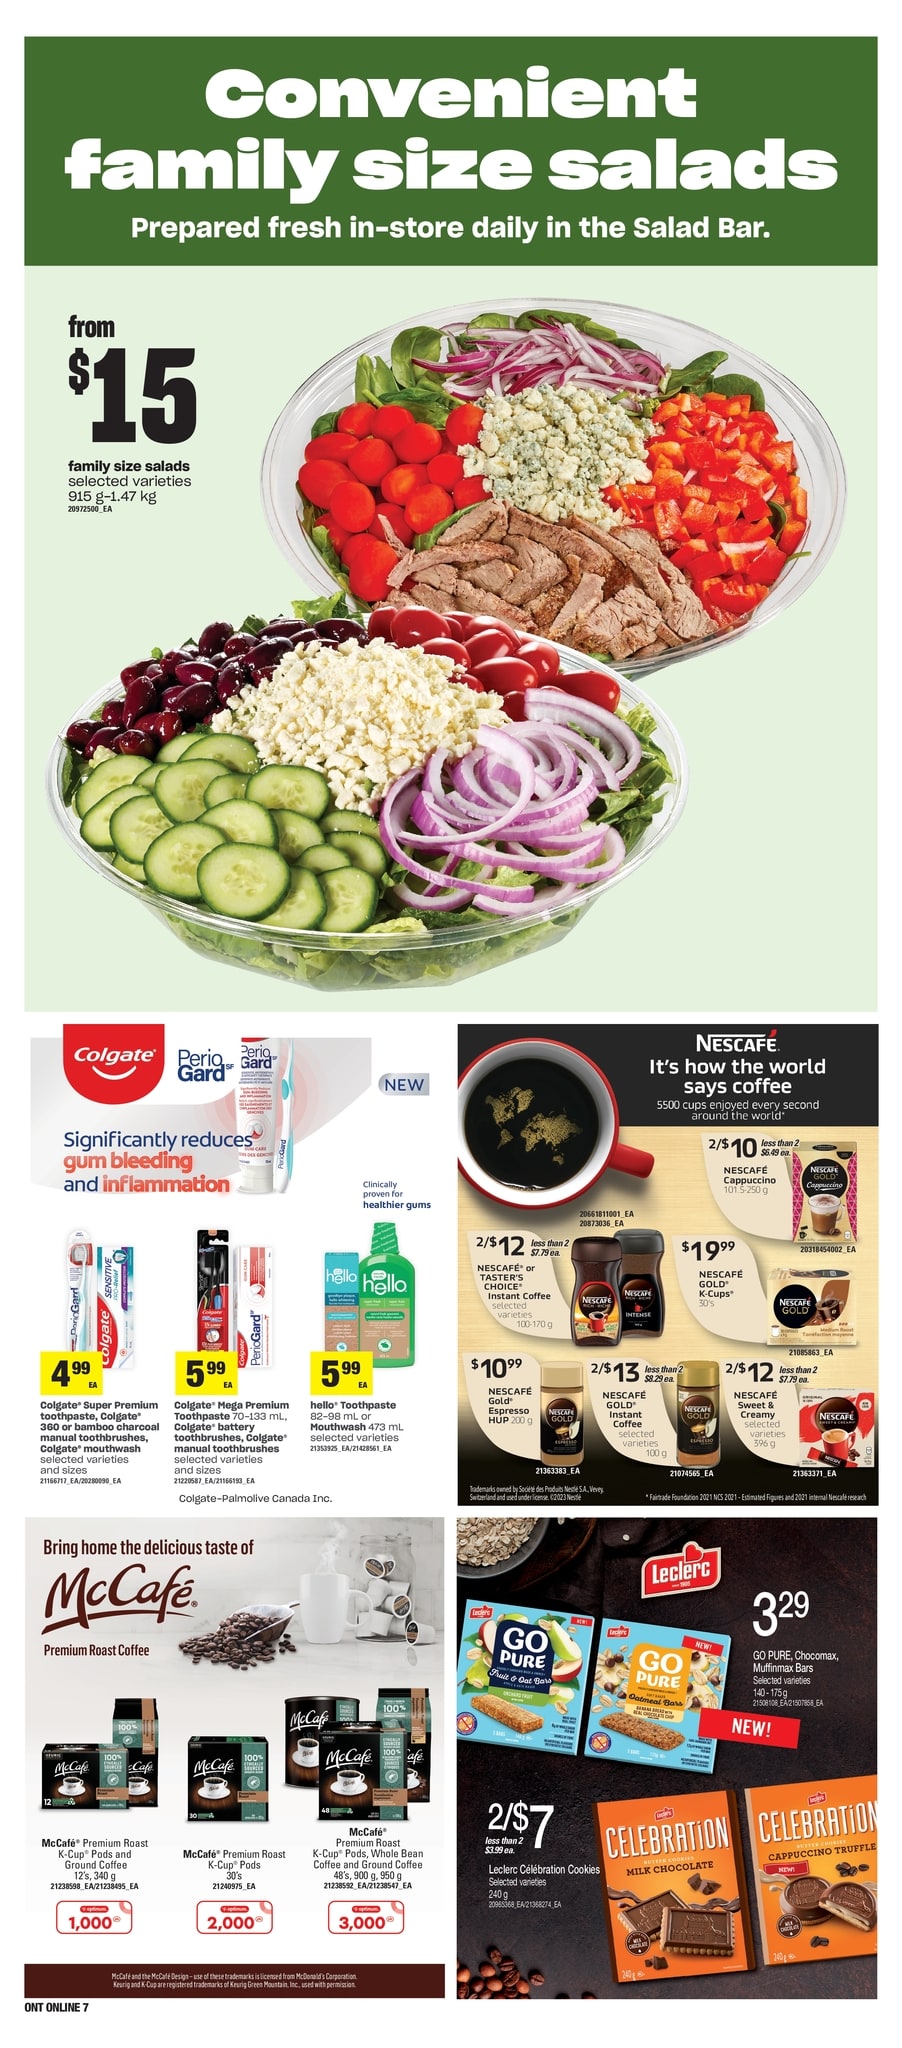 Independent - Ontario - Weekly Flyer Specials - Page 13